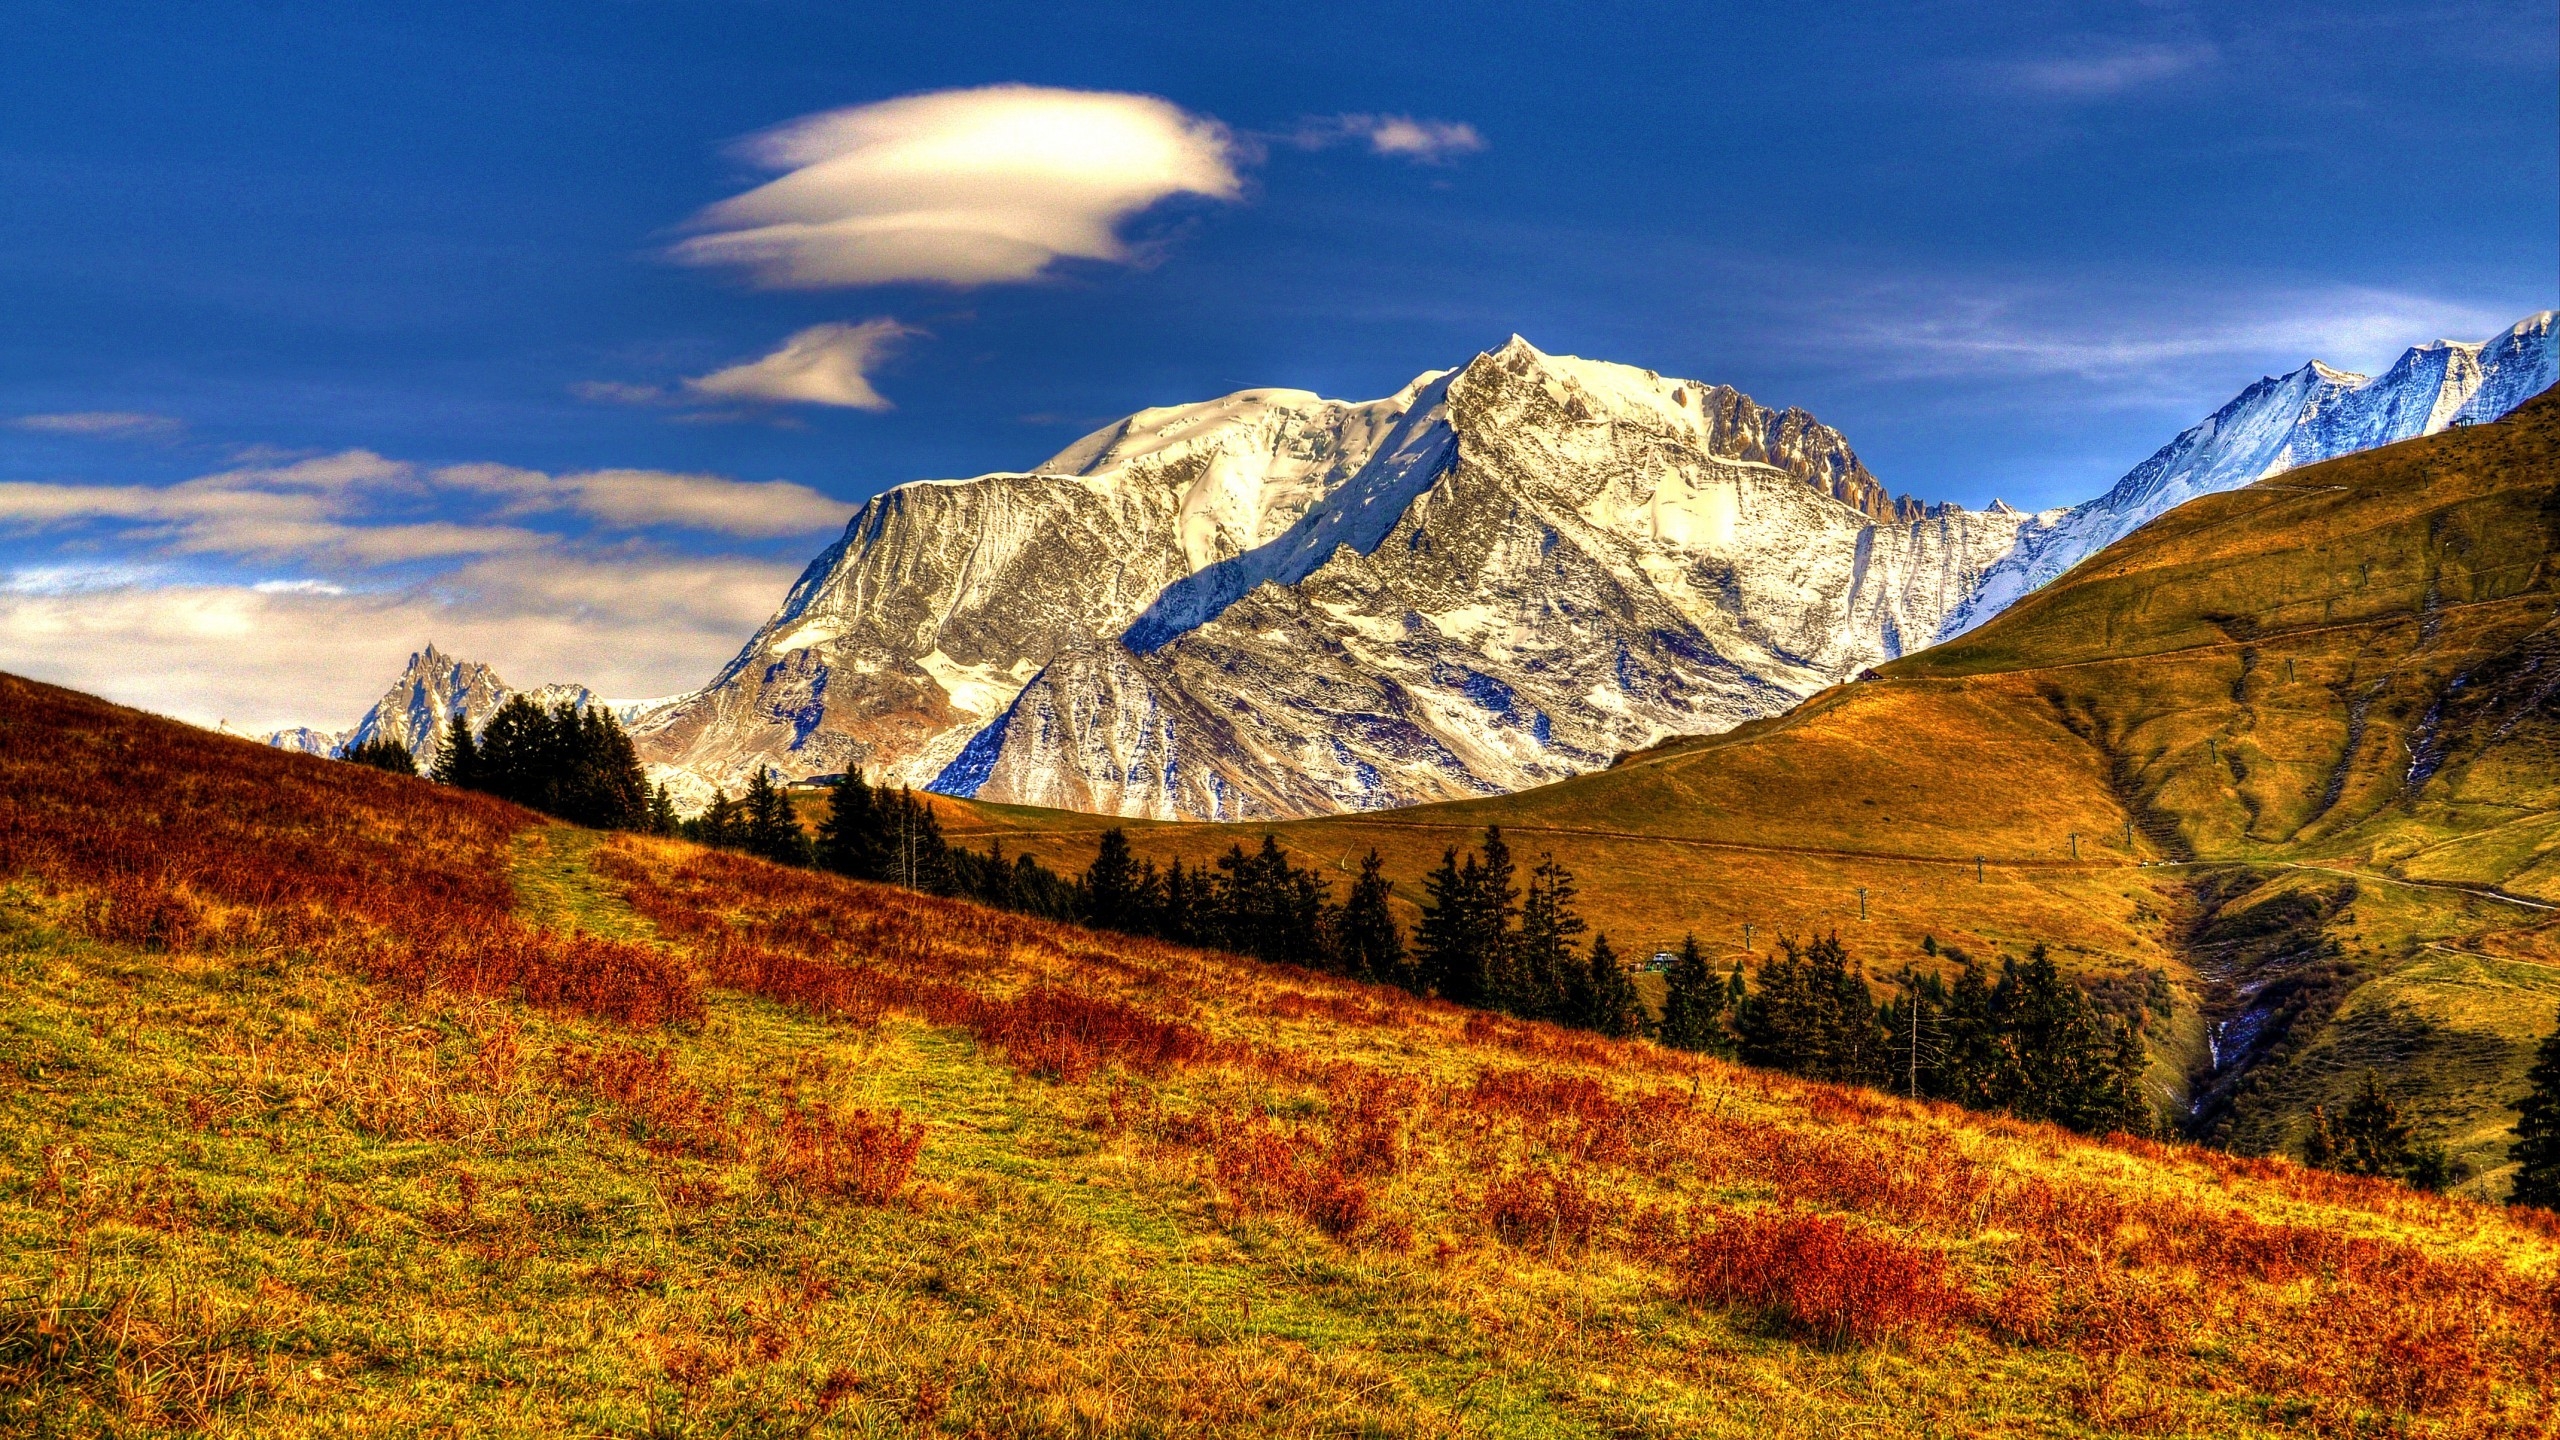 HDR Mountain Landscape for 2560x1440 HDTV resolution